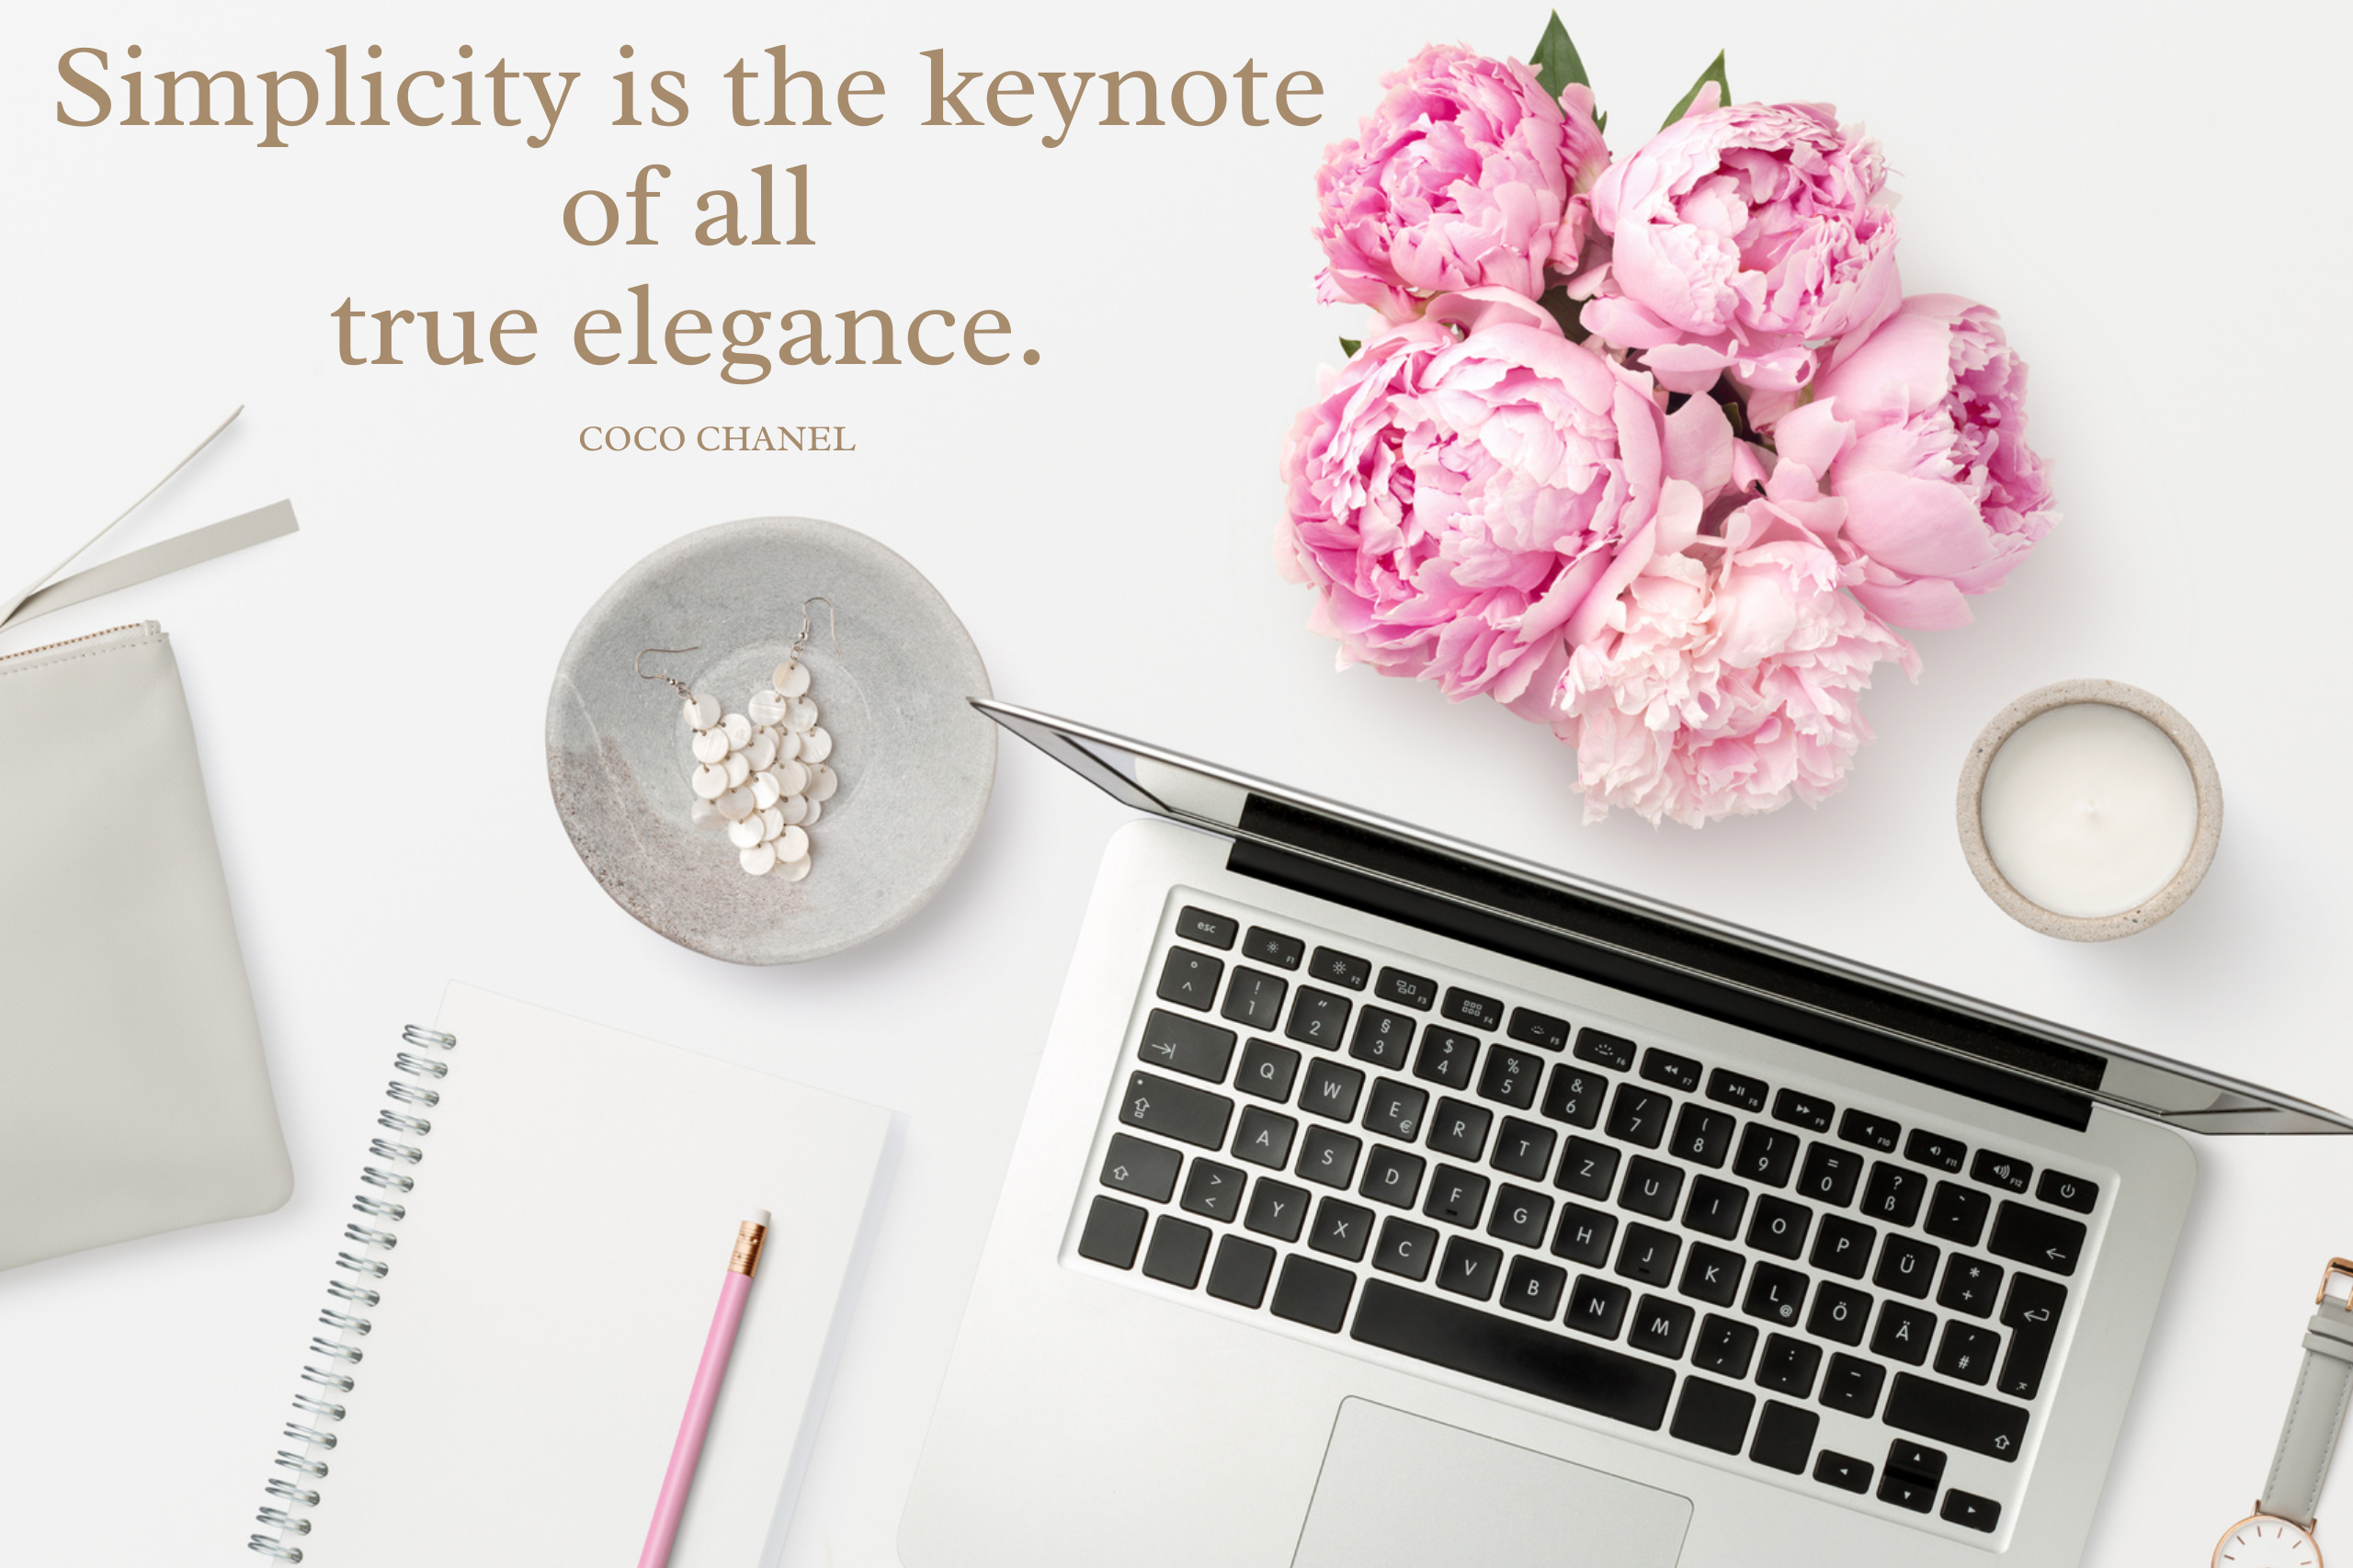 Coco Chanel quote : Simplicity is the keynote of all true elegance.